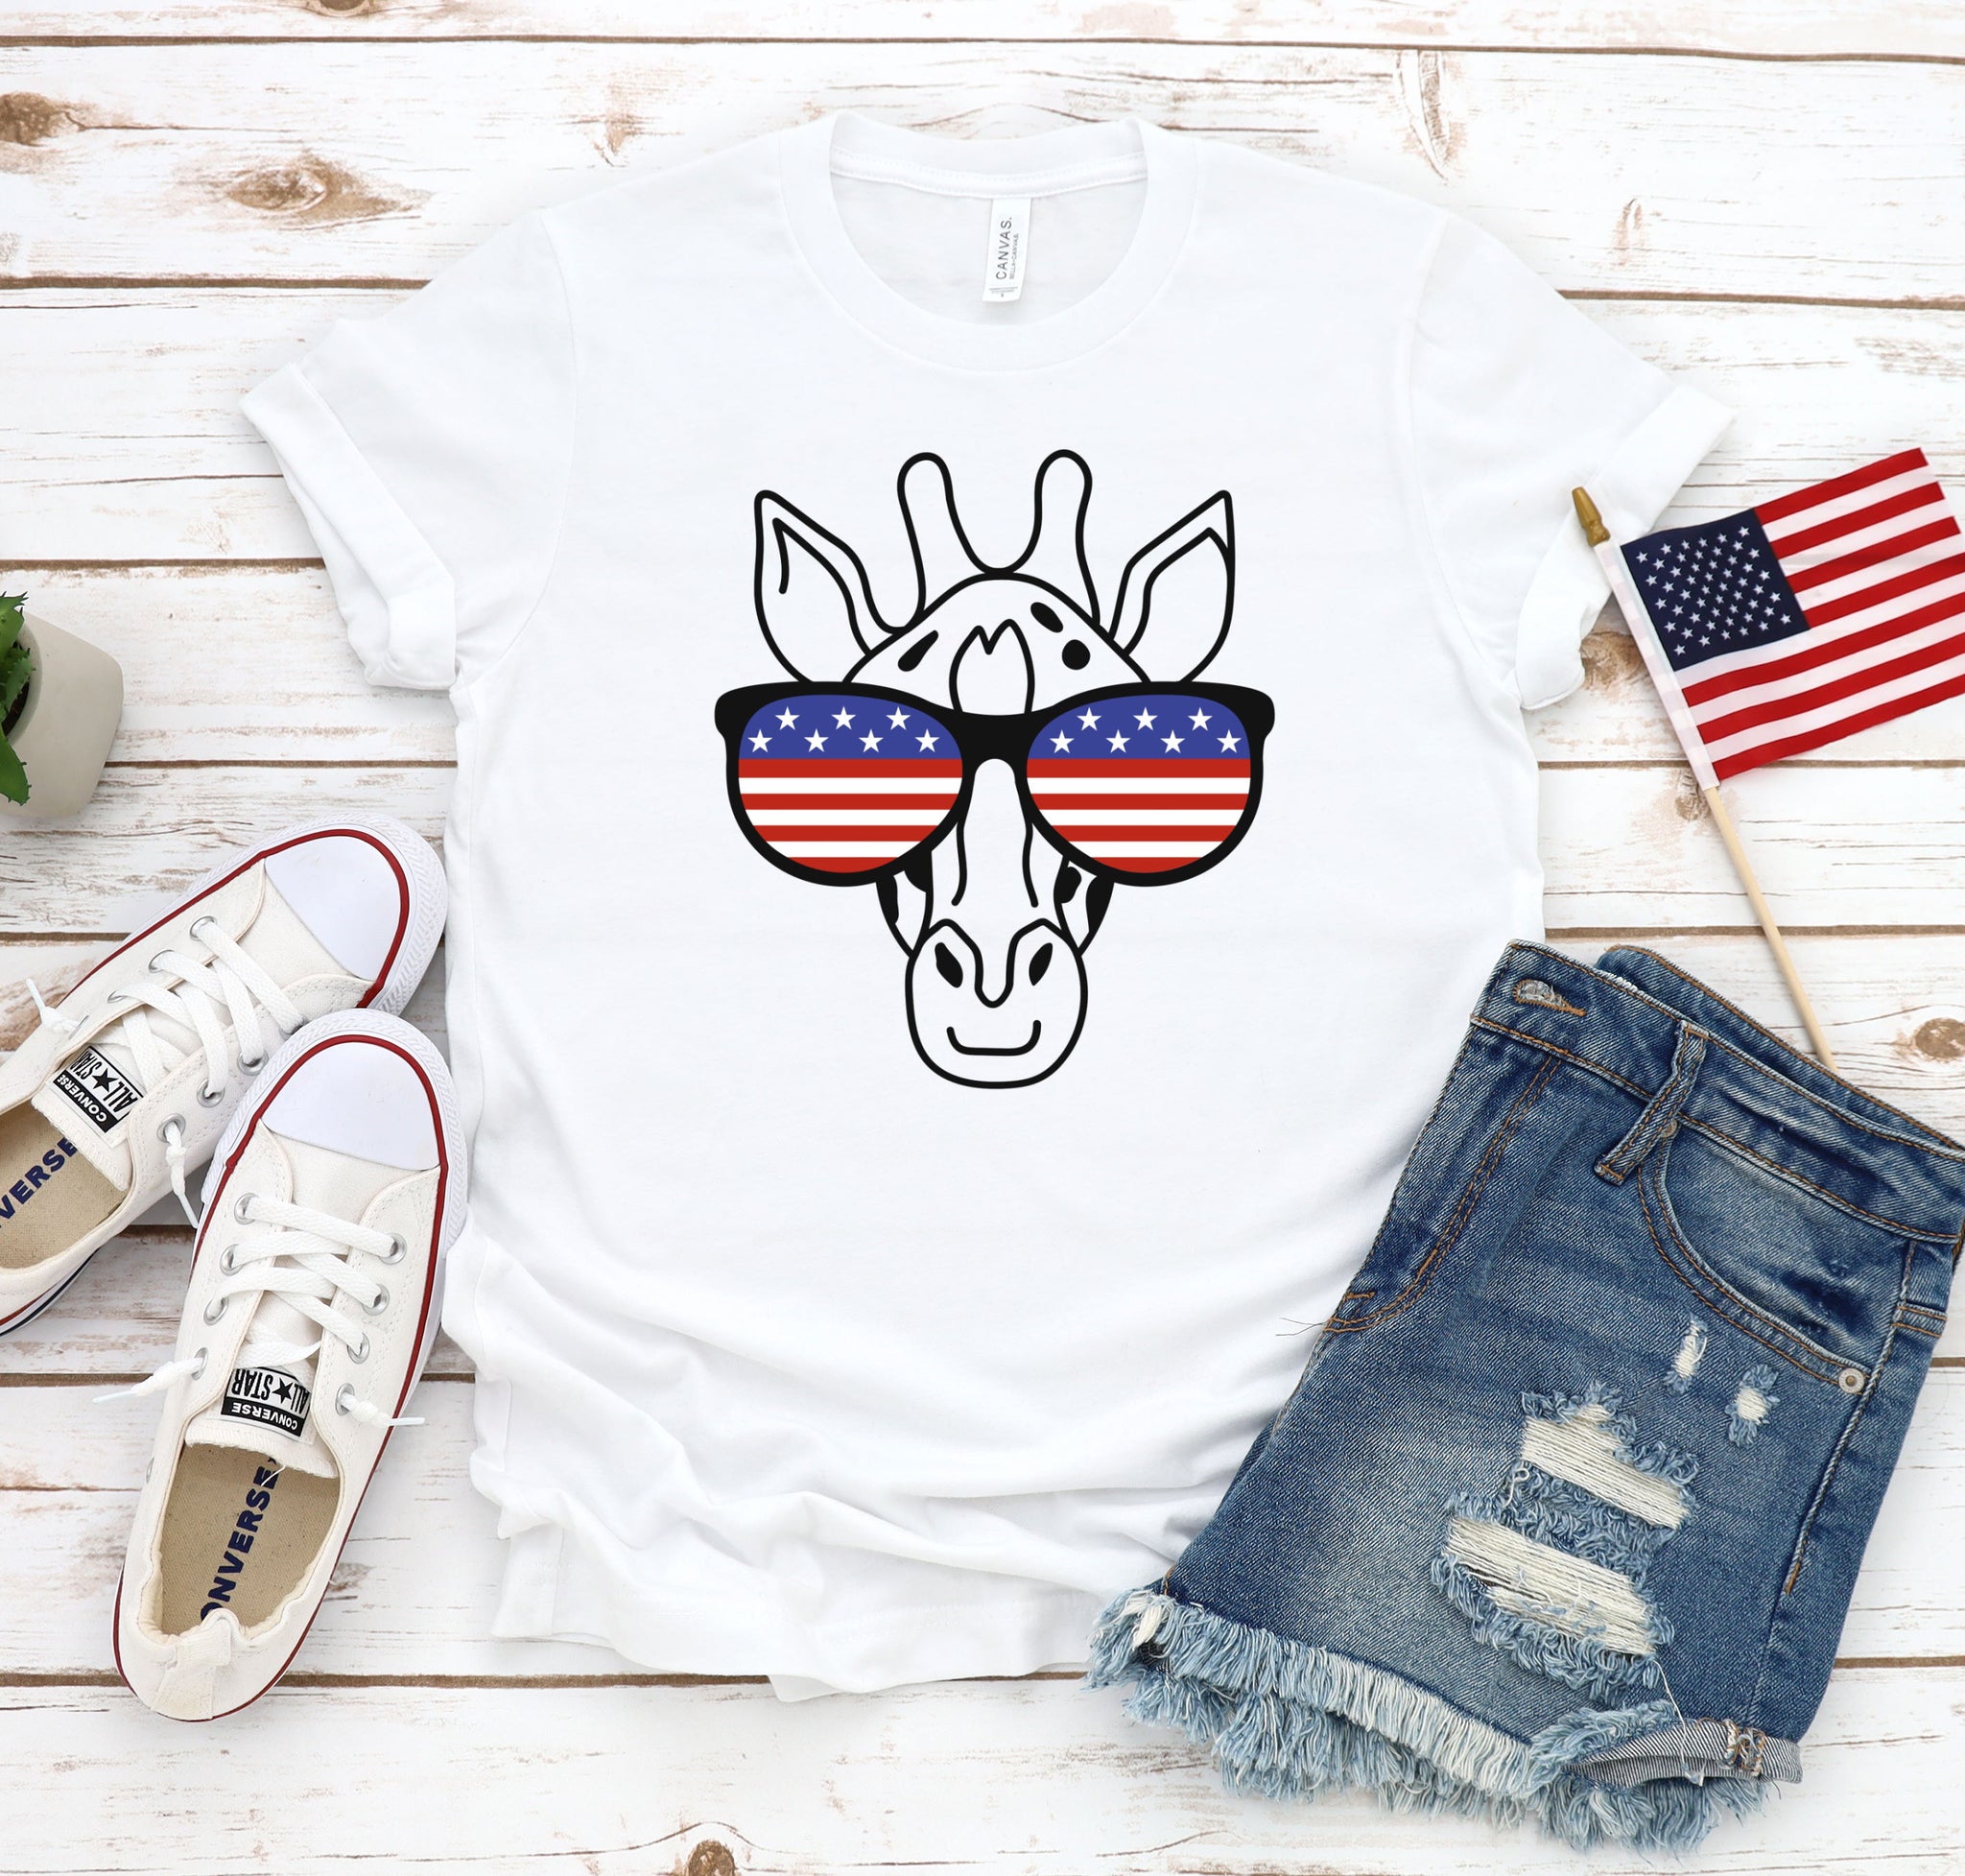 Funny, patriotic t-shirt for tall people with a giraffe's face wearing red, white, and blue glasses.